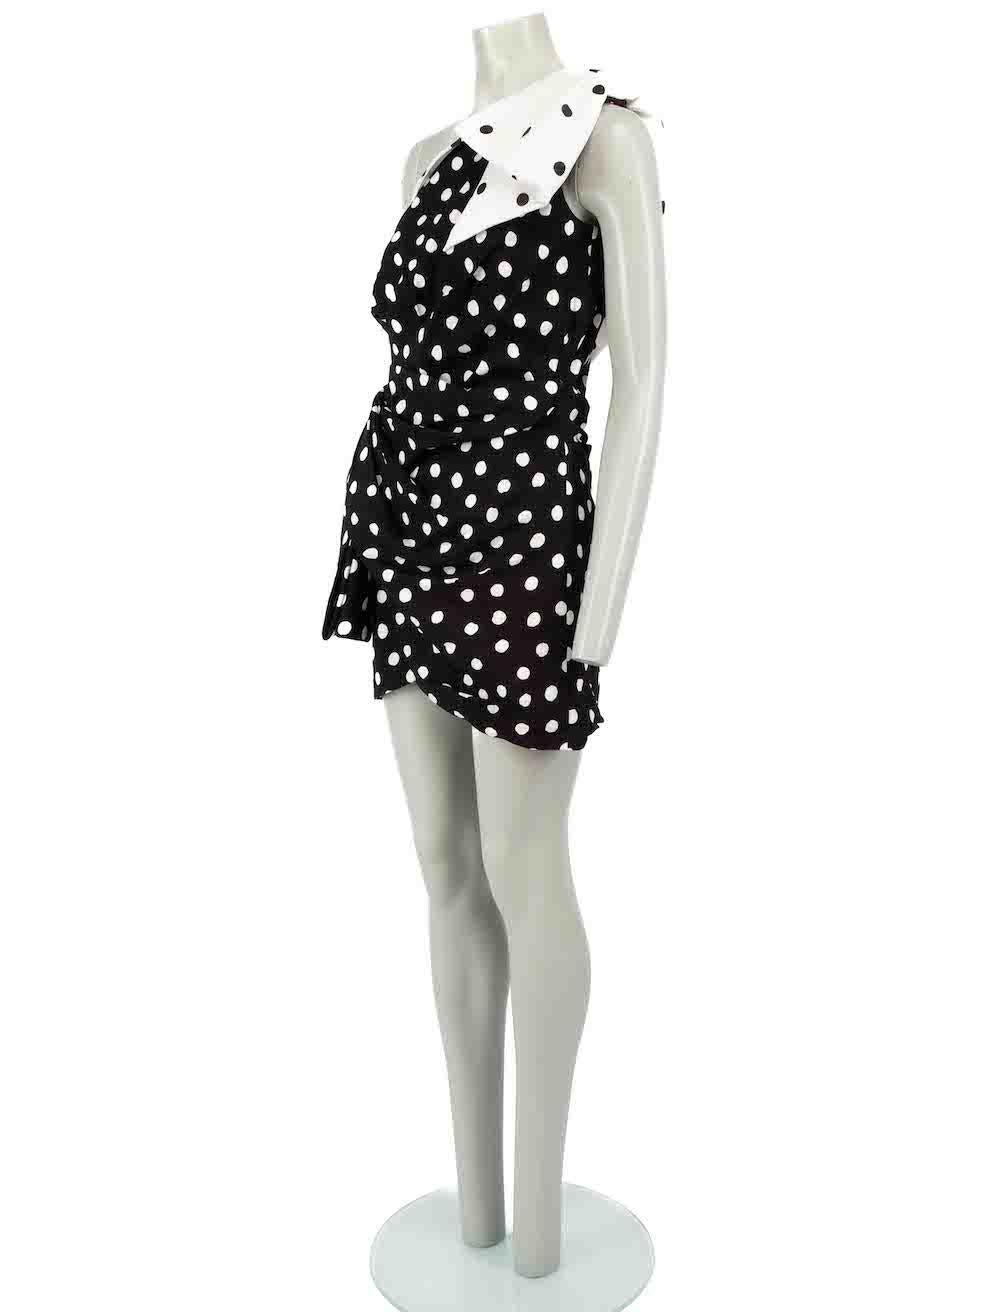 Saint Laurent One Shoulder Bow Polka Dot Mini Dress Size M In New Condition For Sale In London, GB